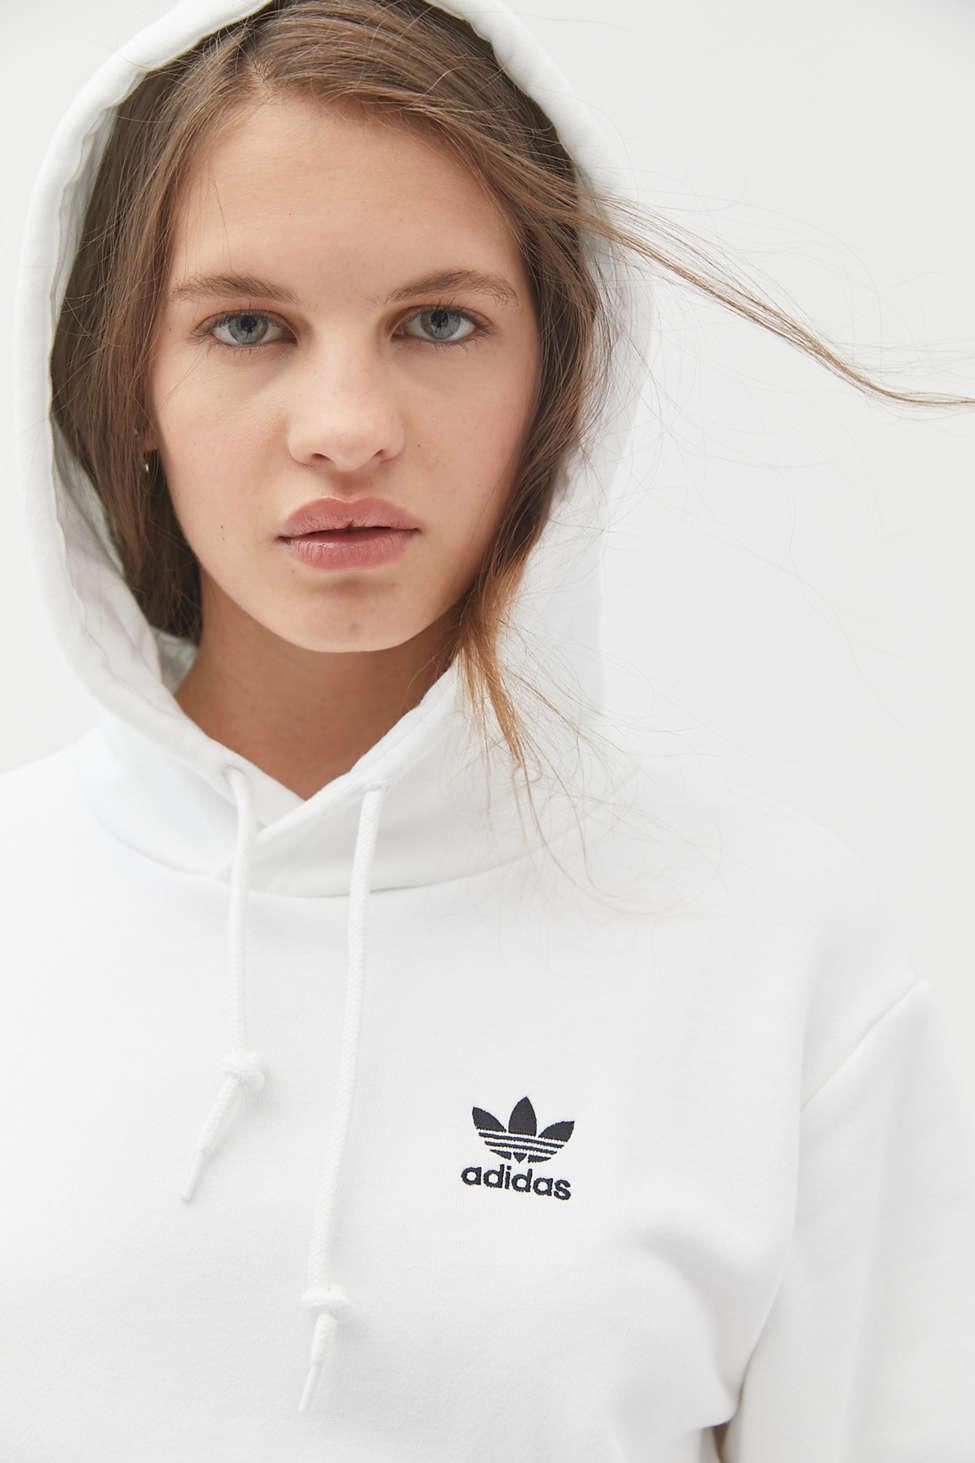 adidas the brand with the 3 stripes hoodie